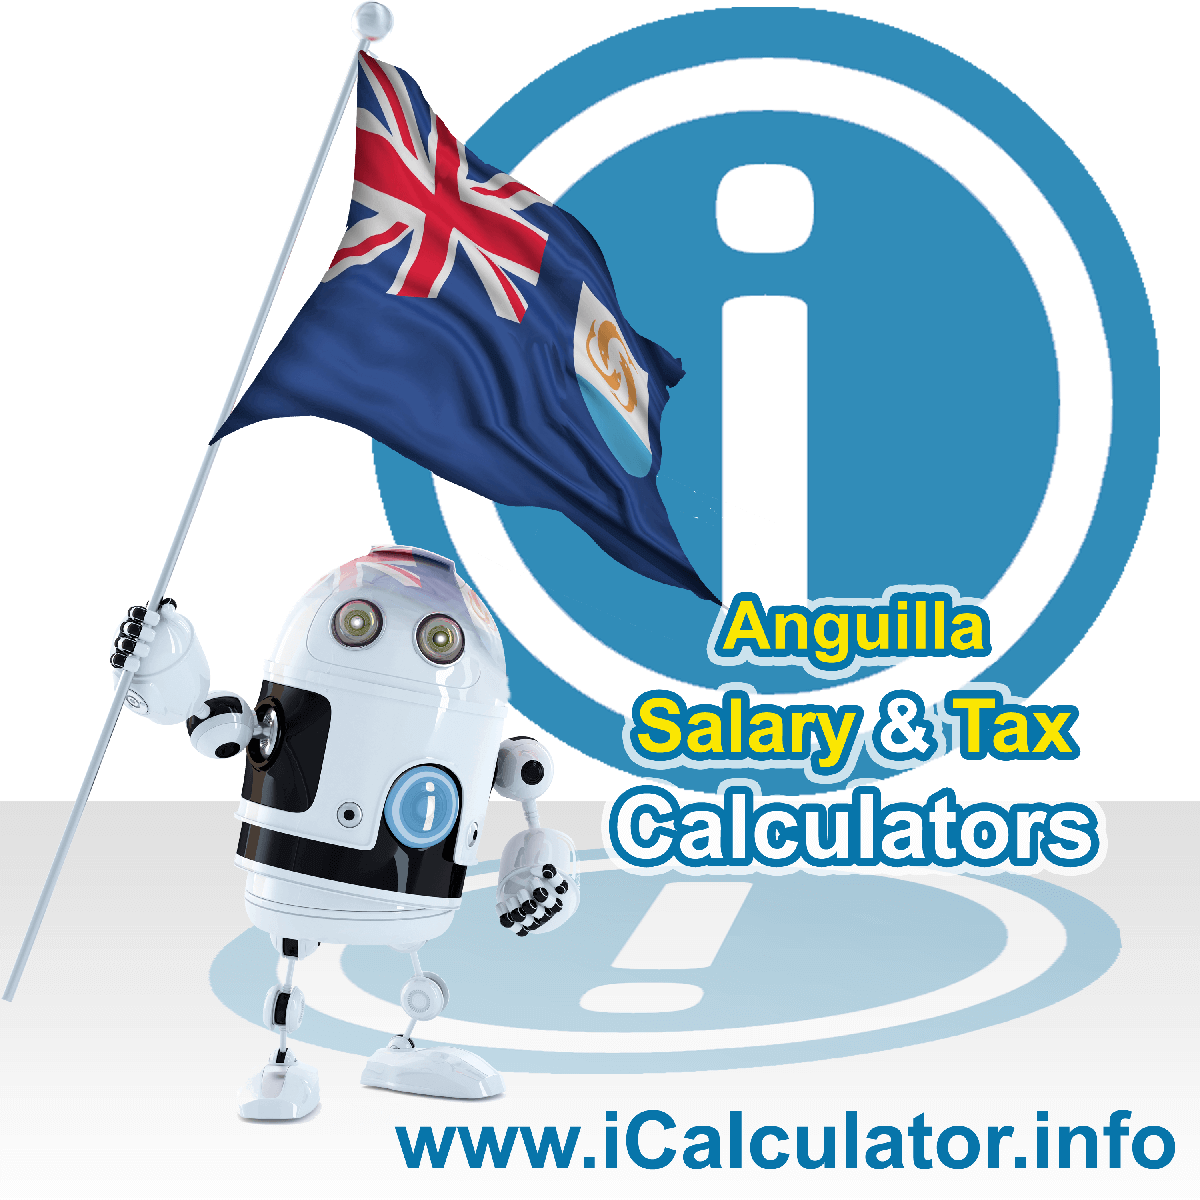 Anguilla Salary Calculator. This image shows the Anguillaese flag and information relating to the tax formula for the Anguilla Tax Calculator